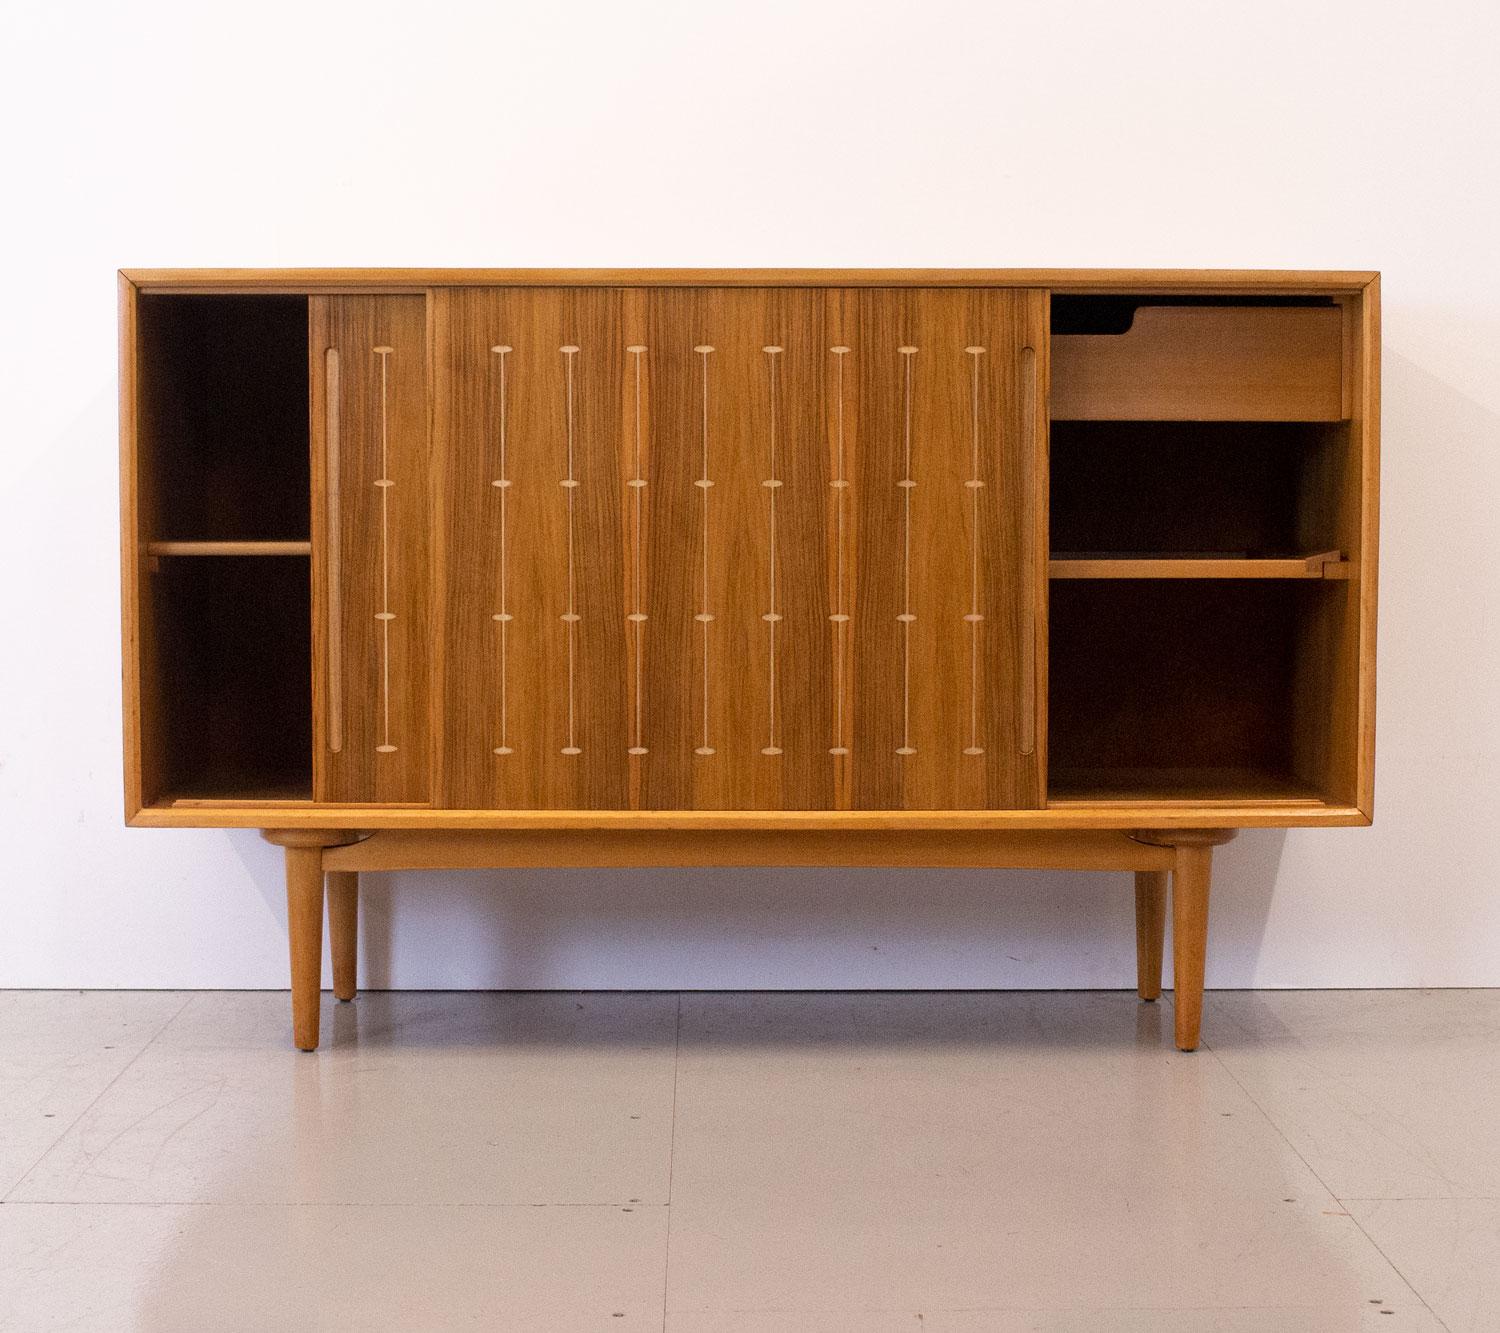 British Mid Century Walnut Sideboard with Routed Pattern by Heals, 1950s